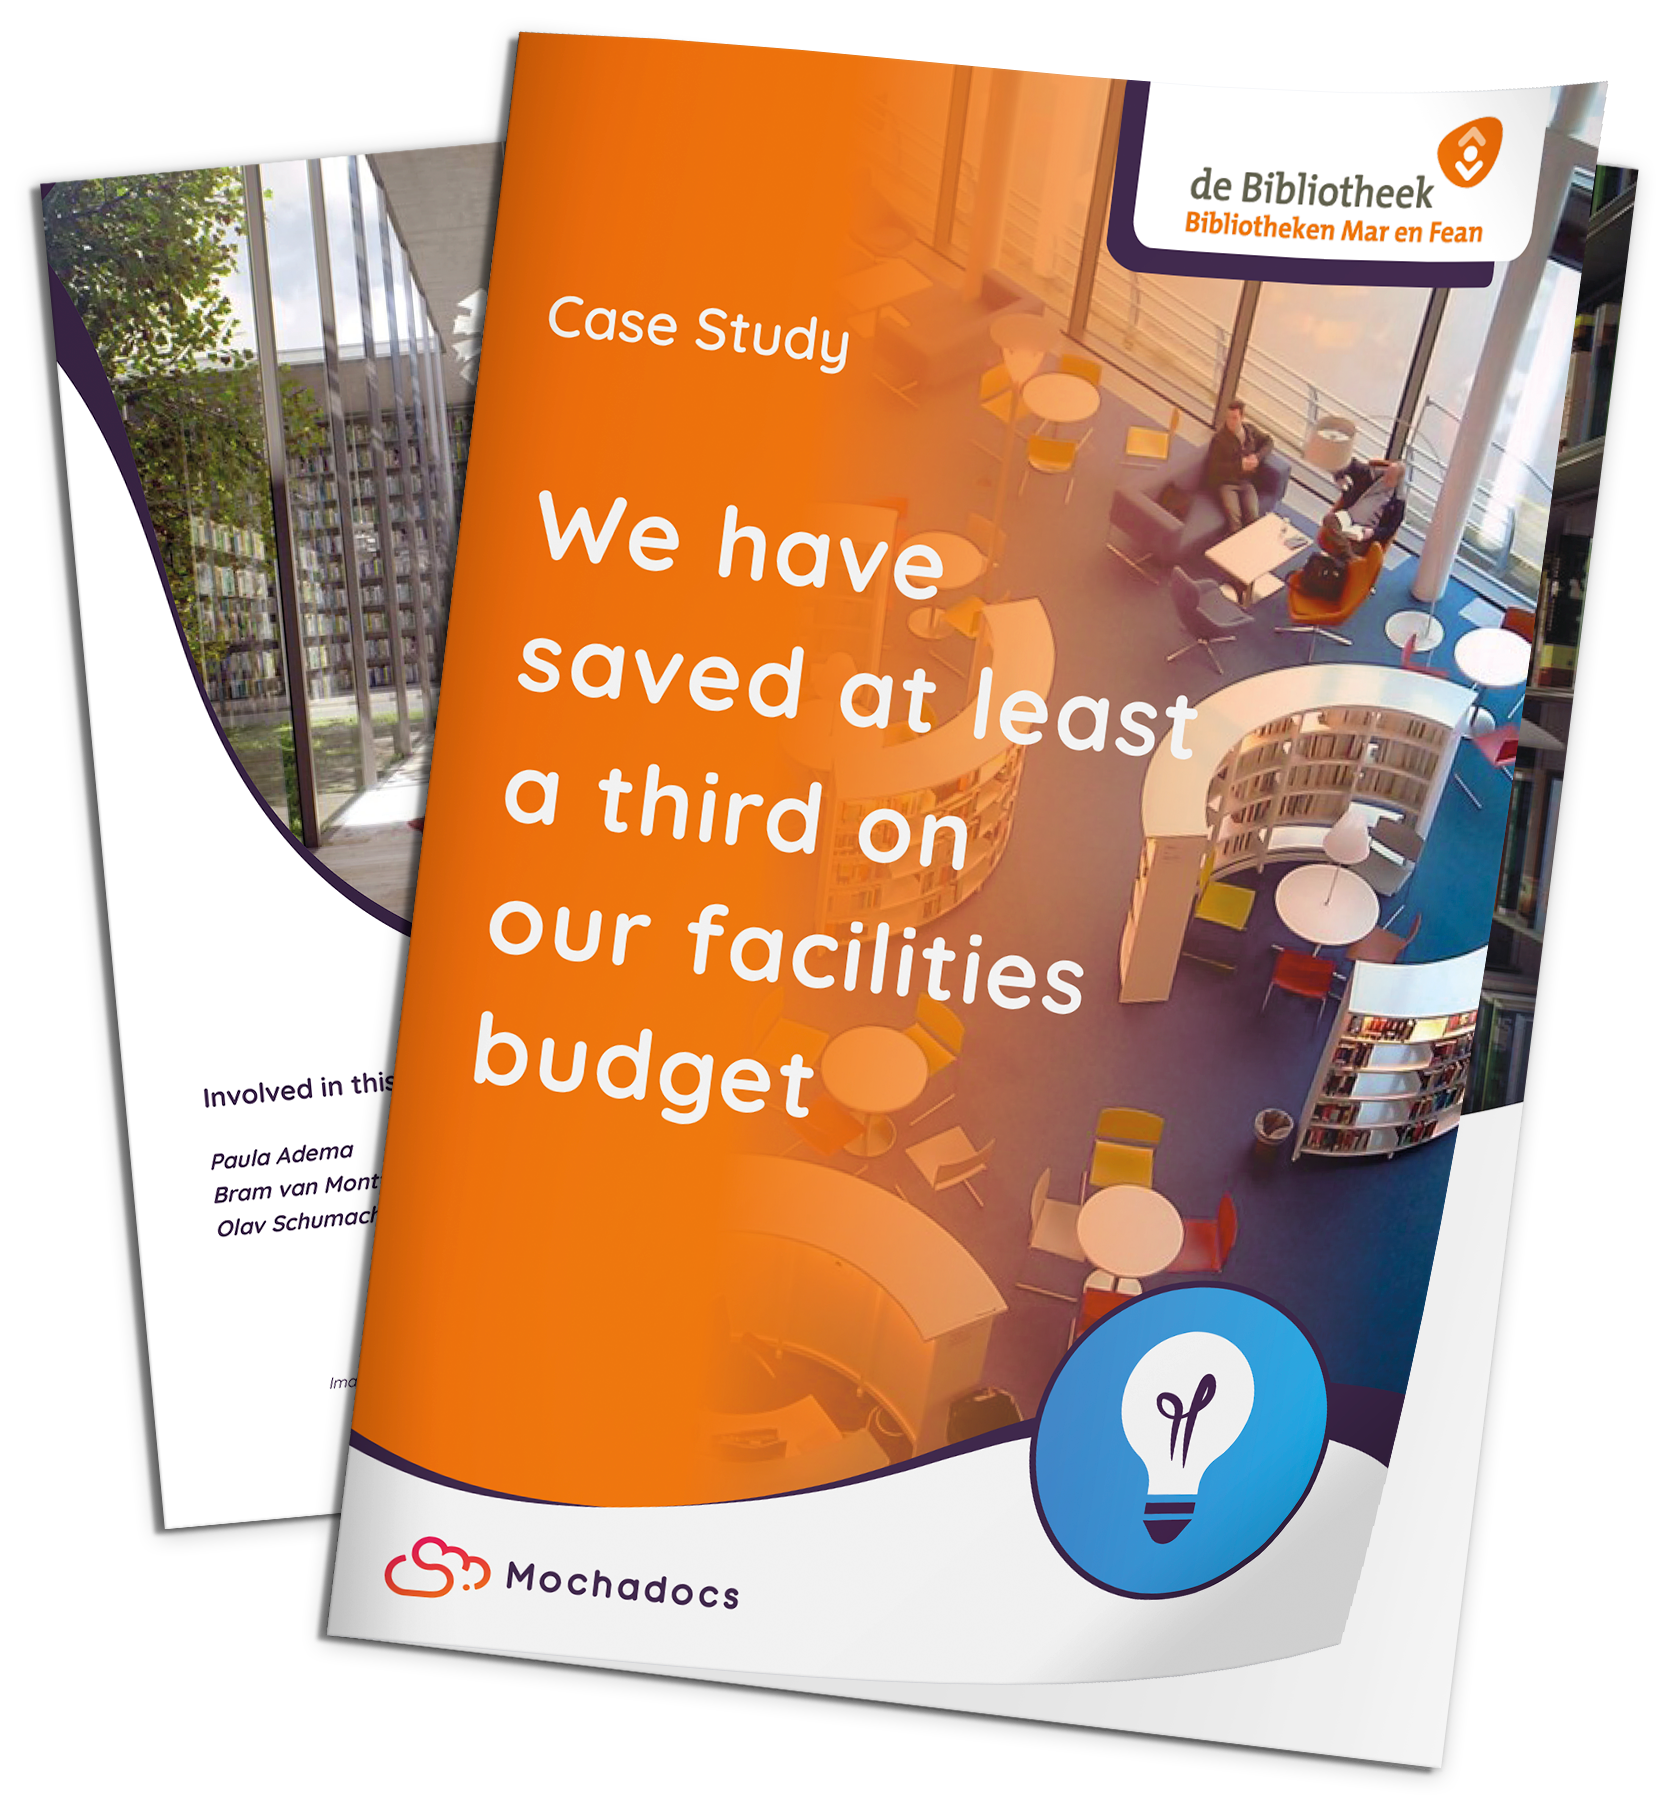 Mochadocs - Contract Management - Case Study - Mar en Fean - We have saved at least a third on our facilities budget